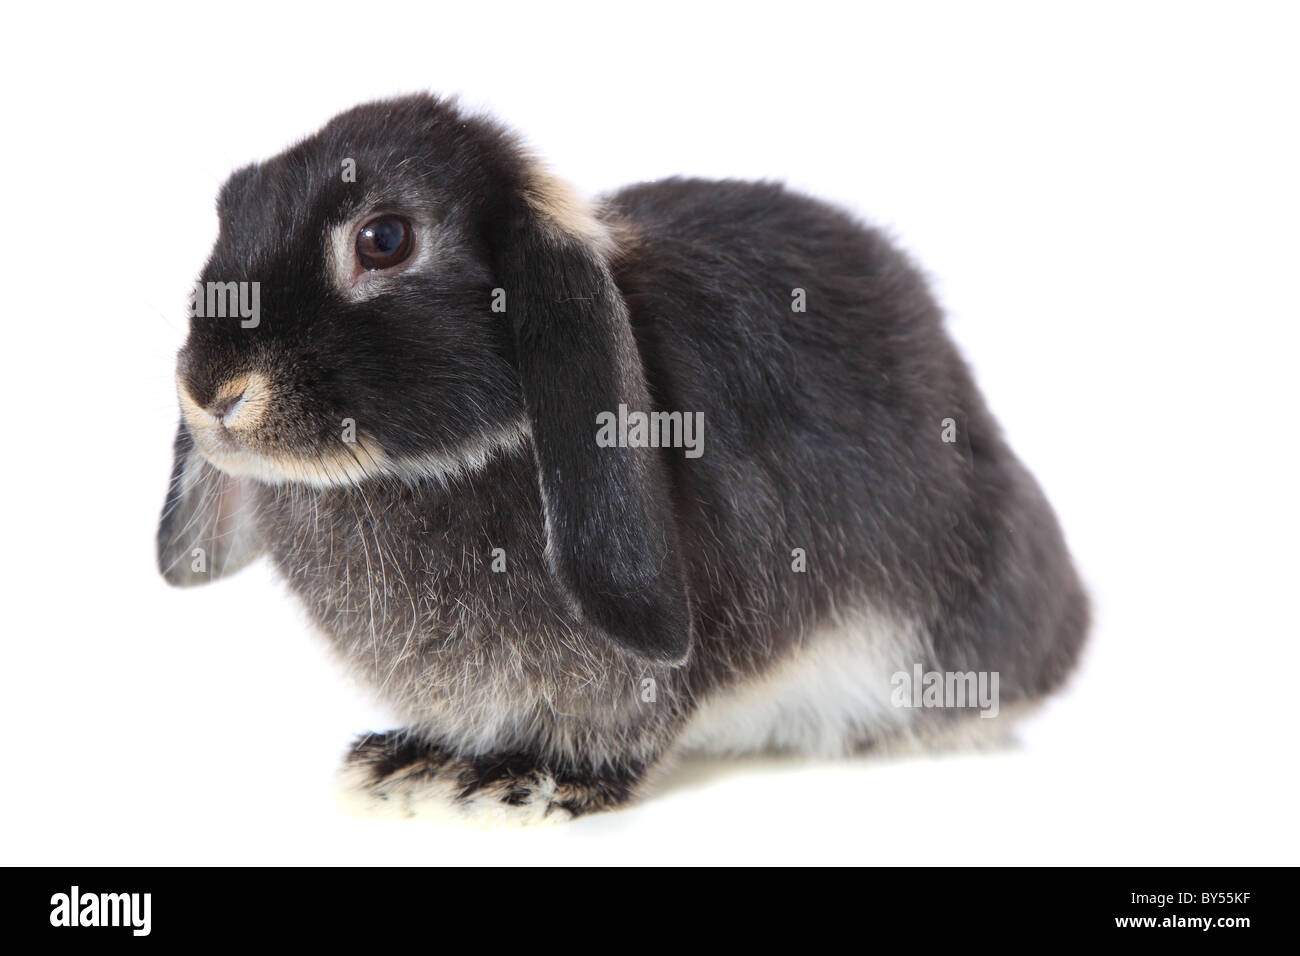 Cute little rabbit. All on white background. Stock Photo